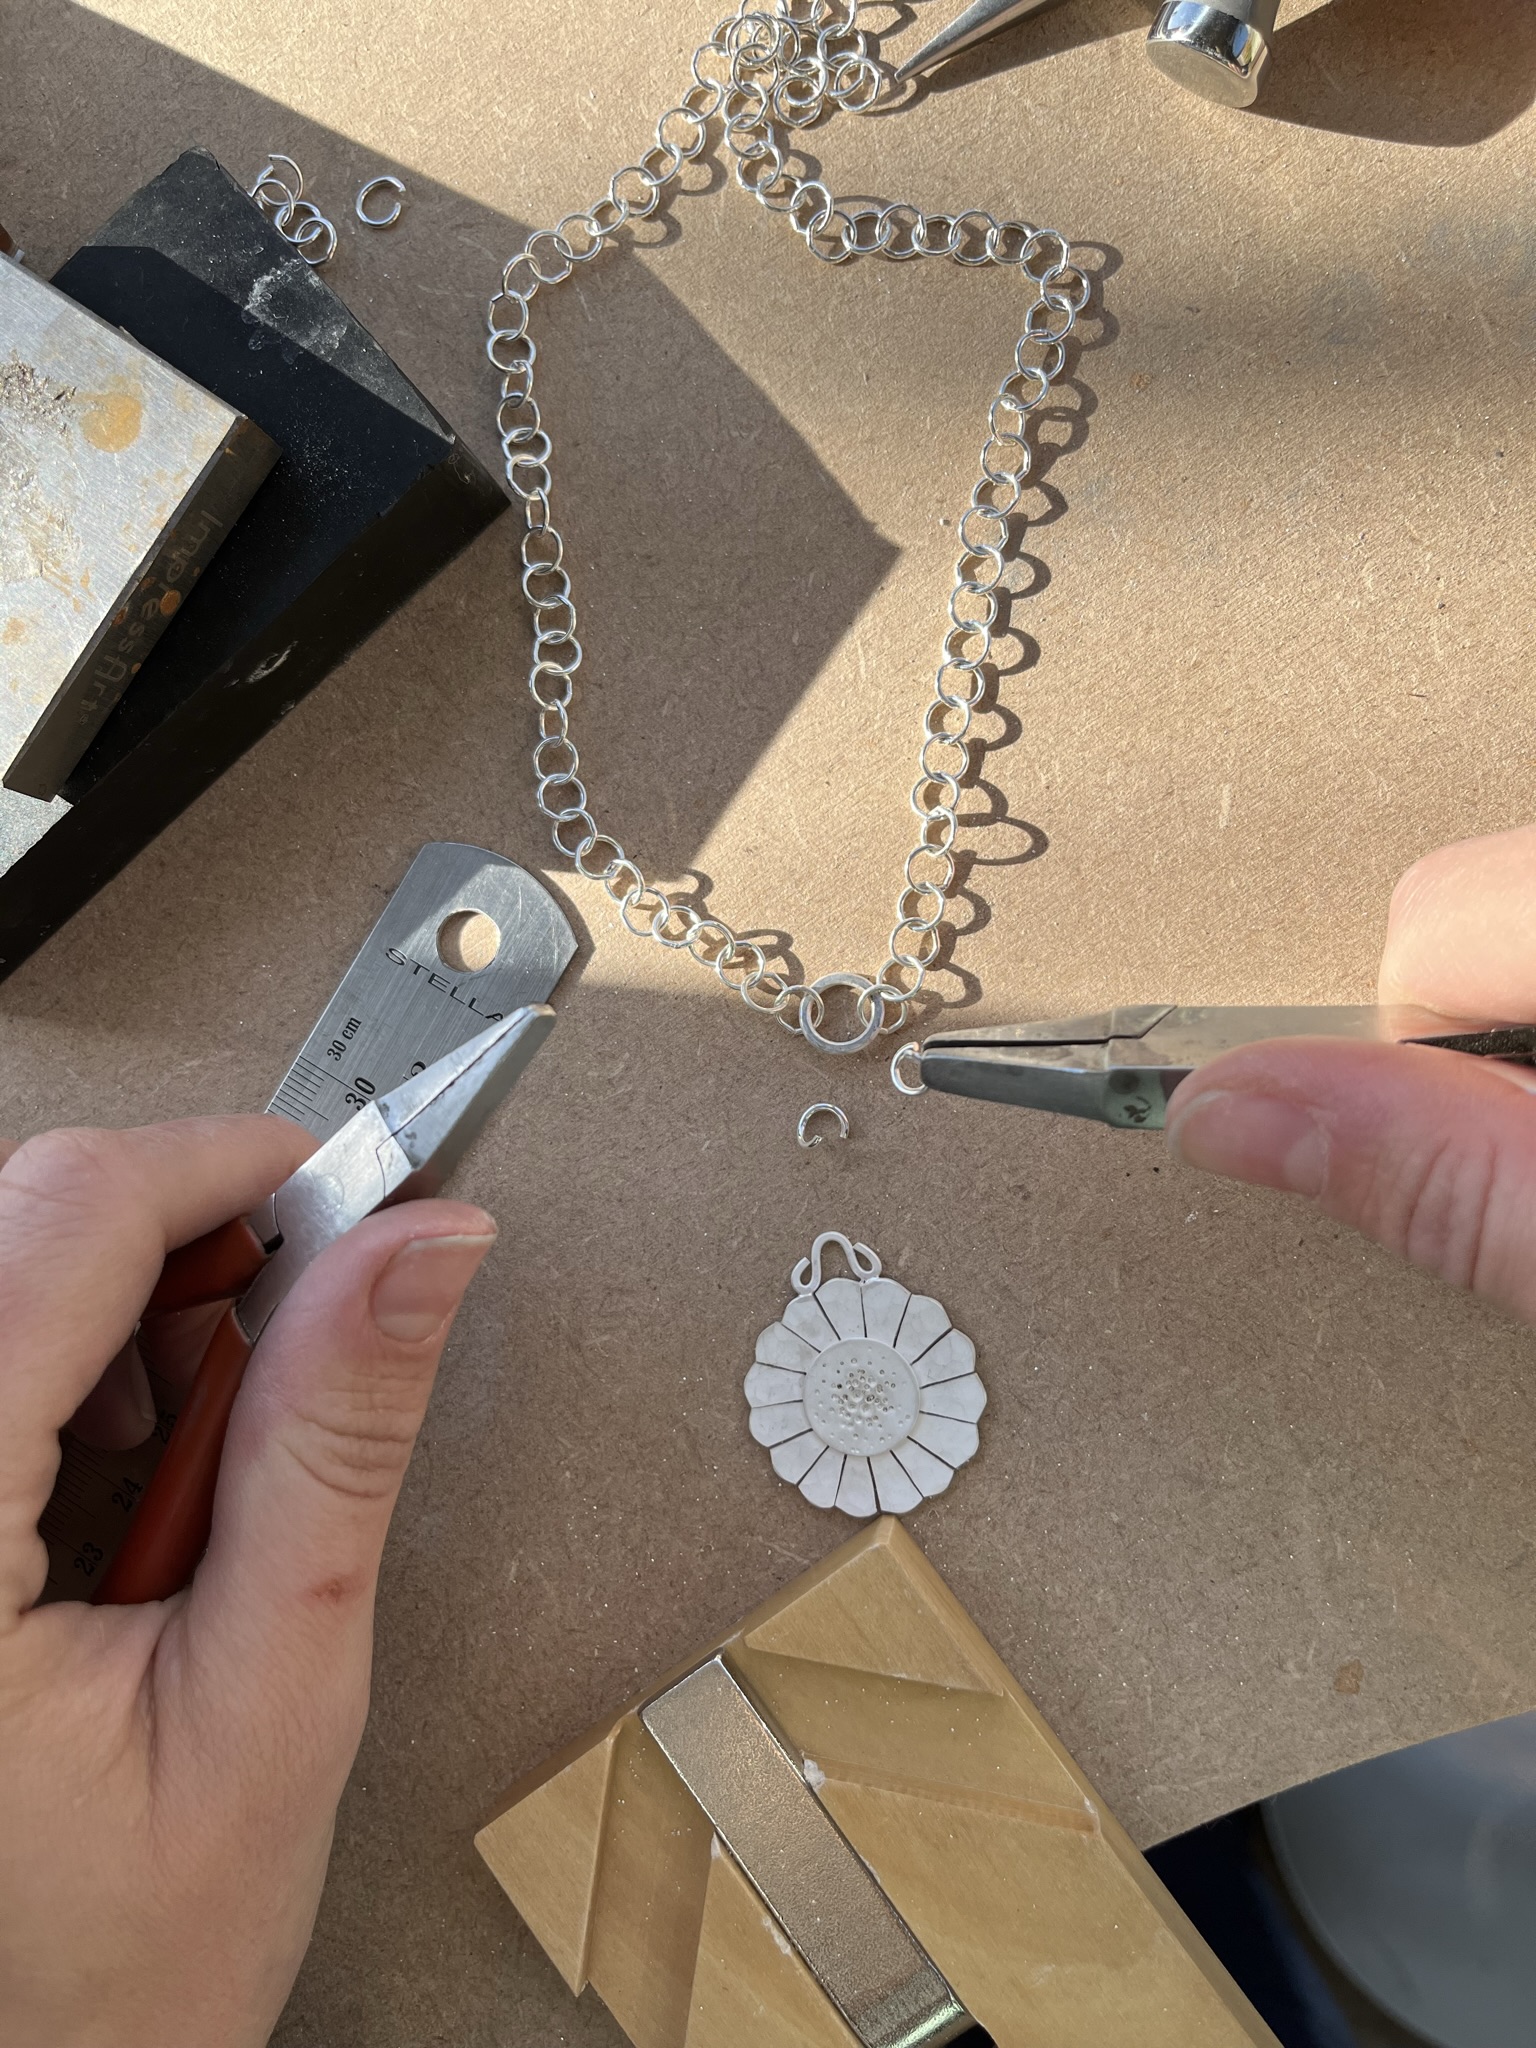 Use jumprings to attach the flower pendant. 